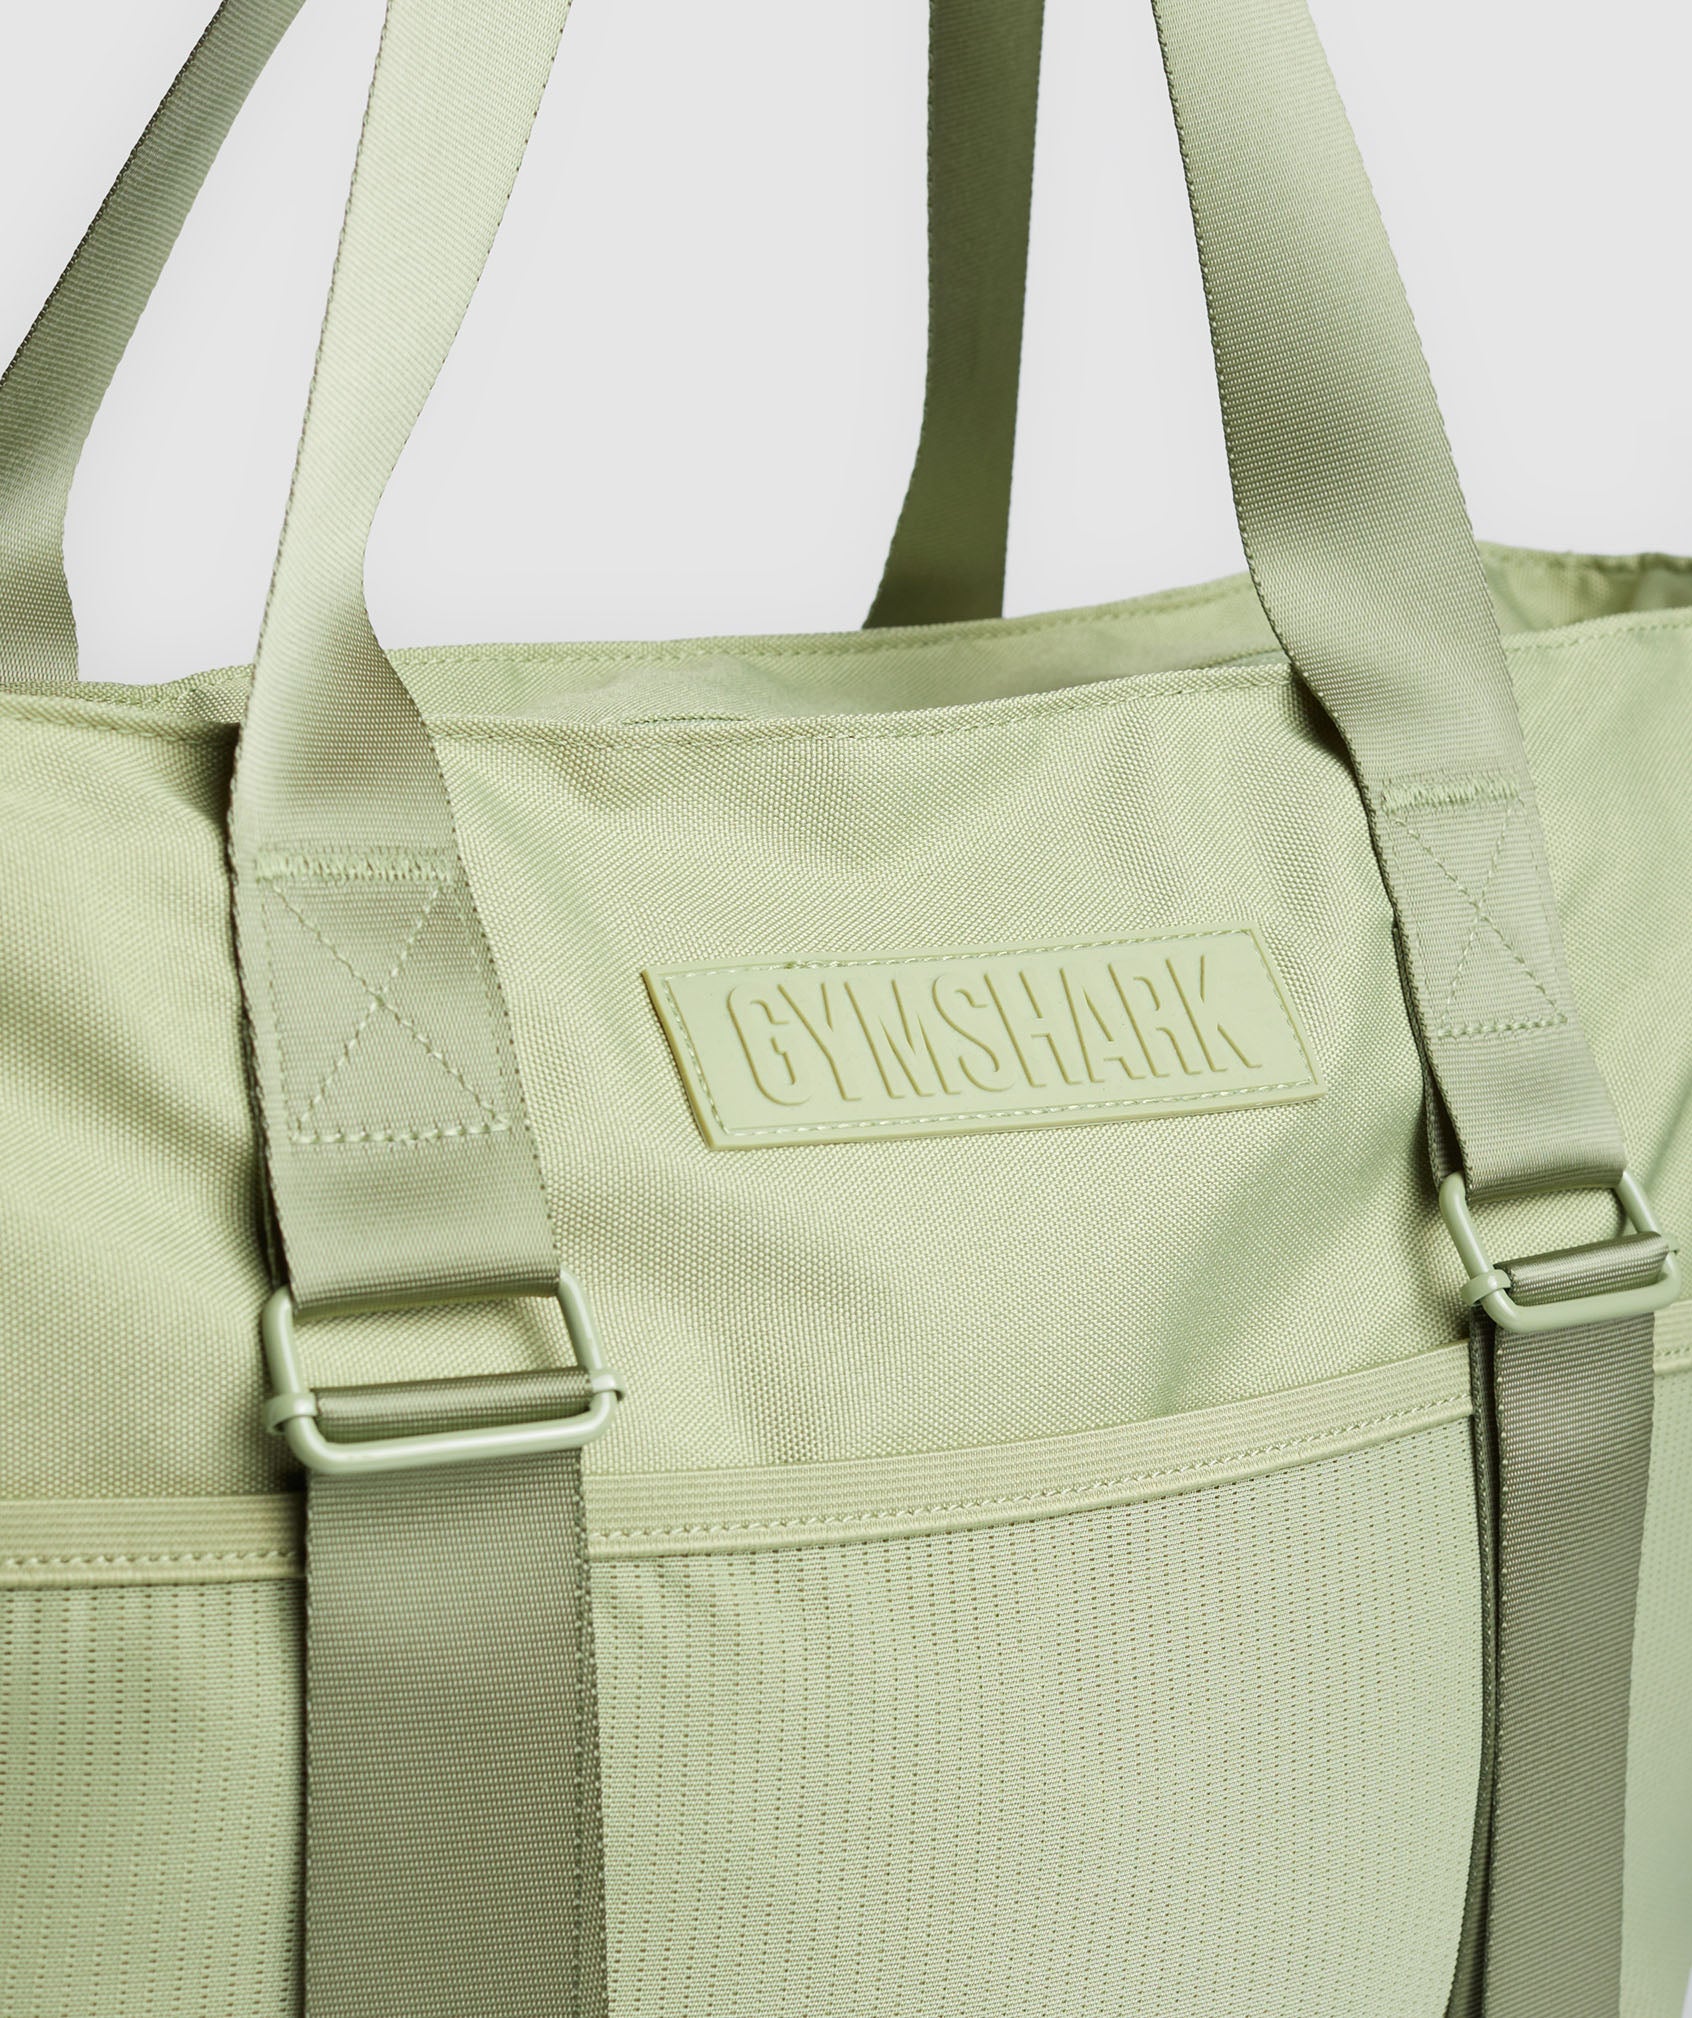 Everyday Tote in Natural Sage Green - view 2